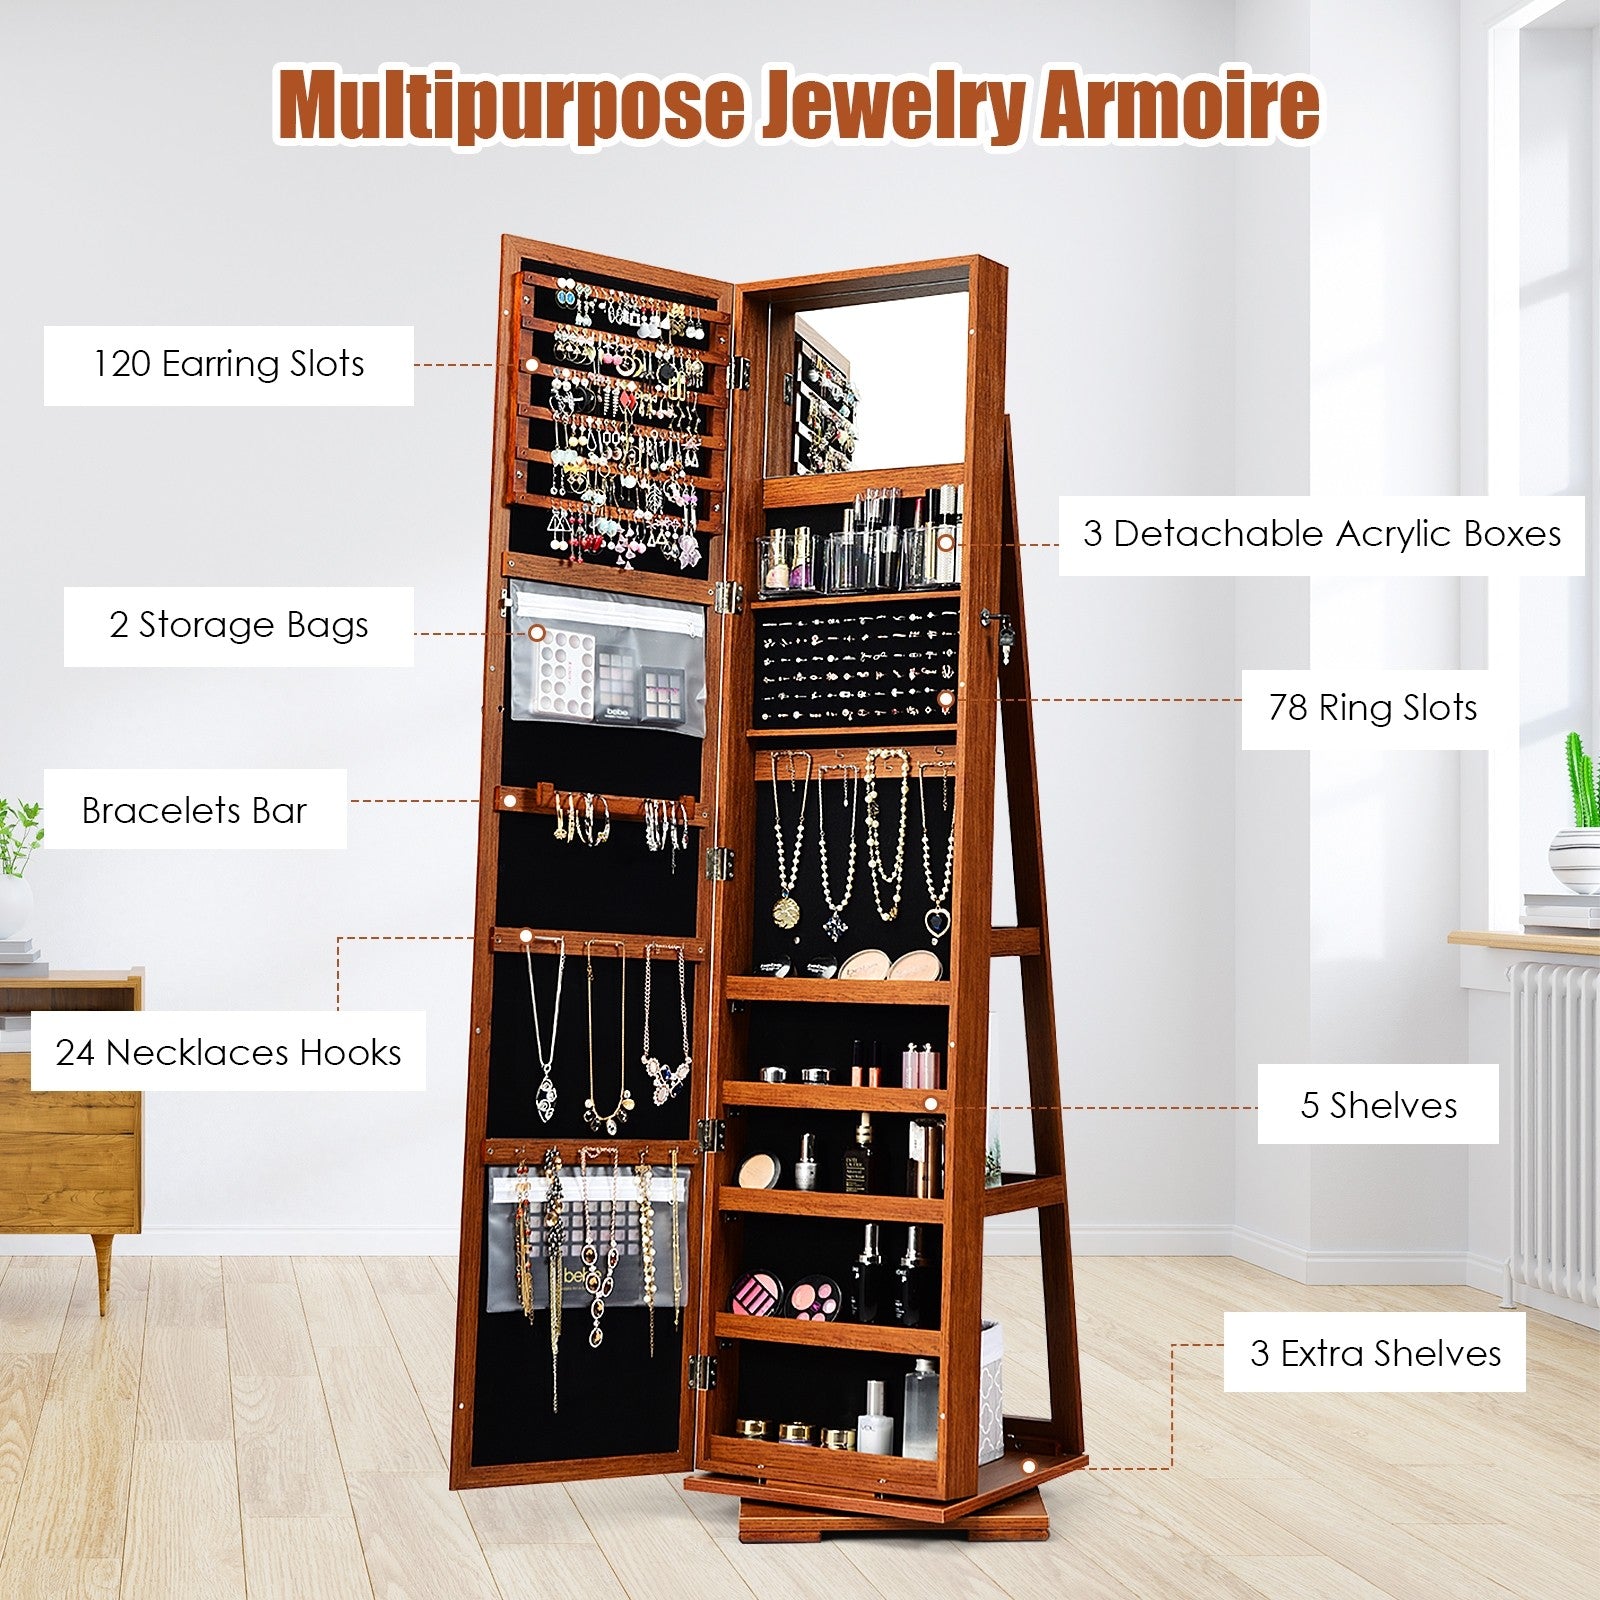 CHARMAID | 360?? Rotating Jewelry Armoire with Higher Full Length Mirror - Giantexus